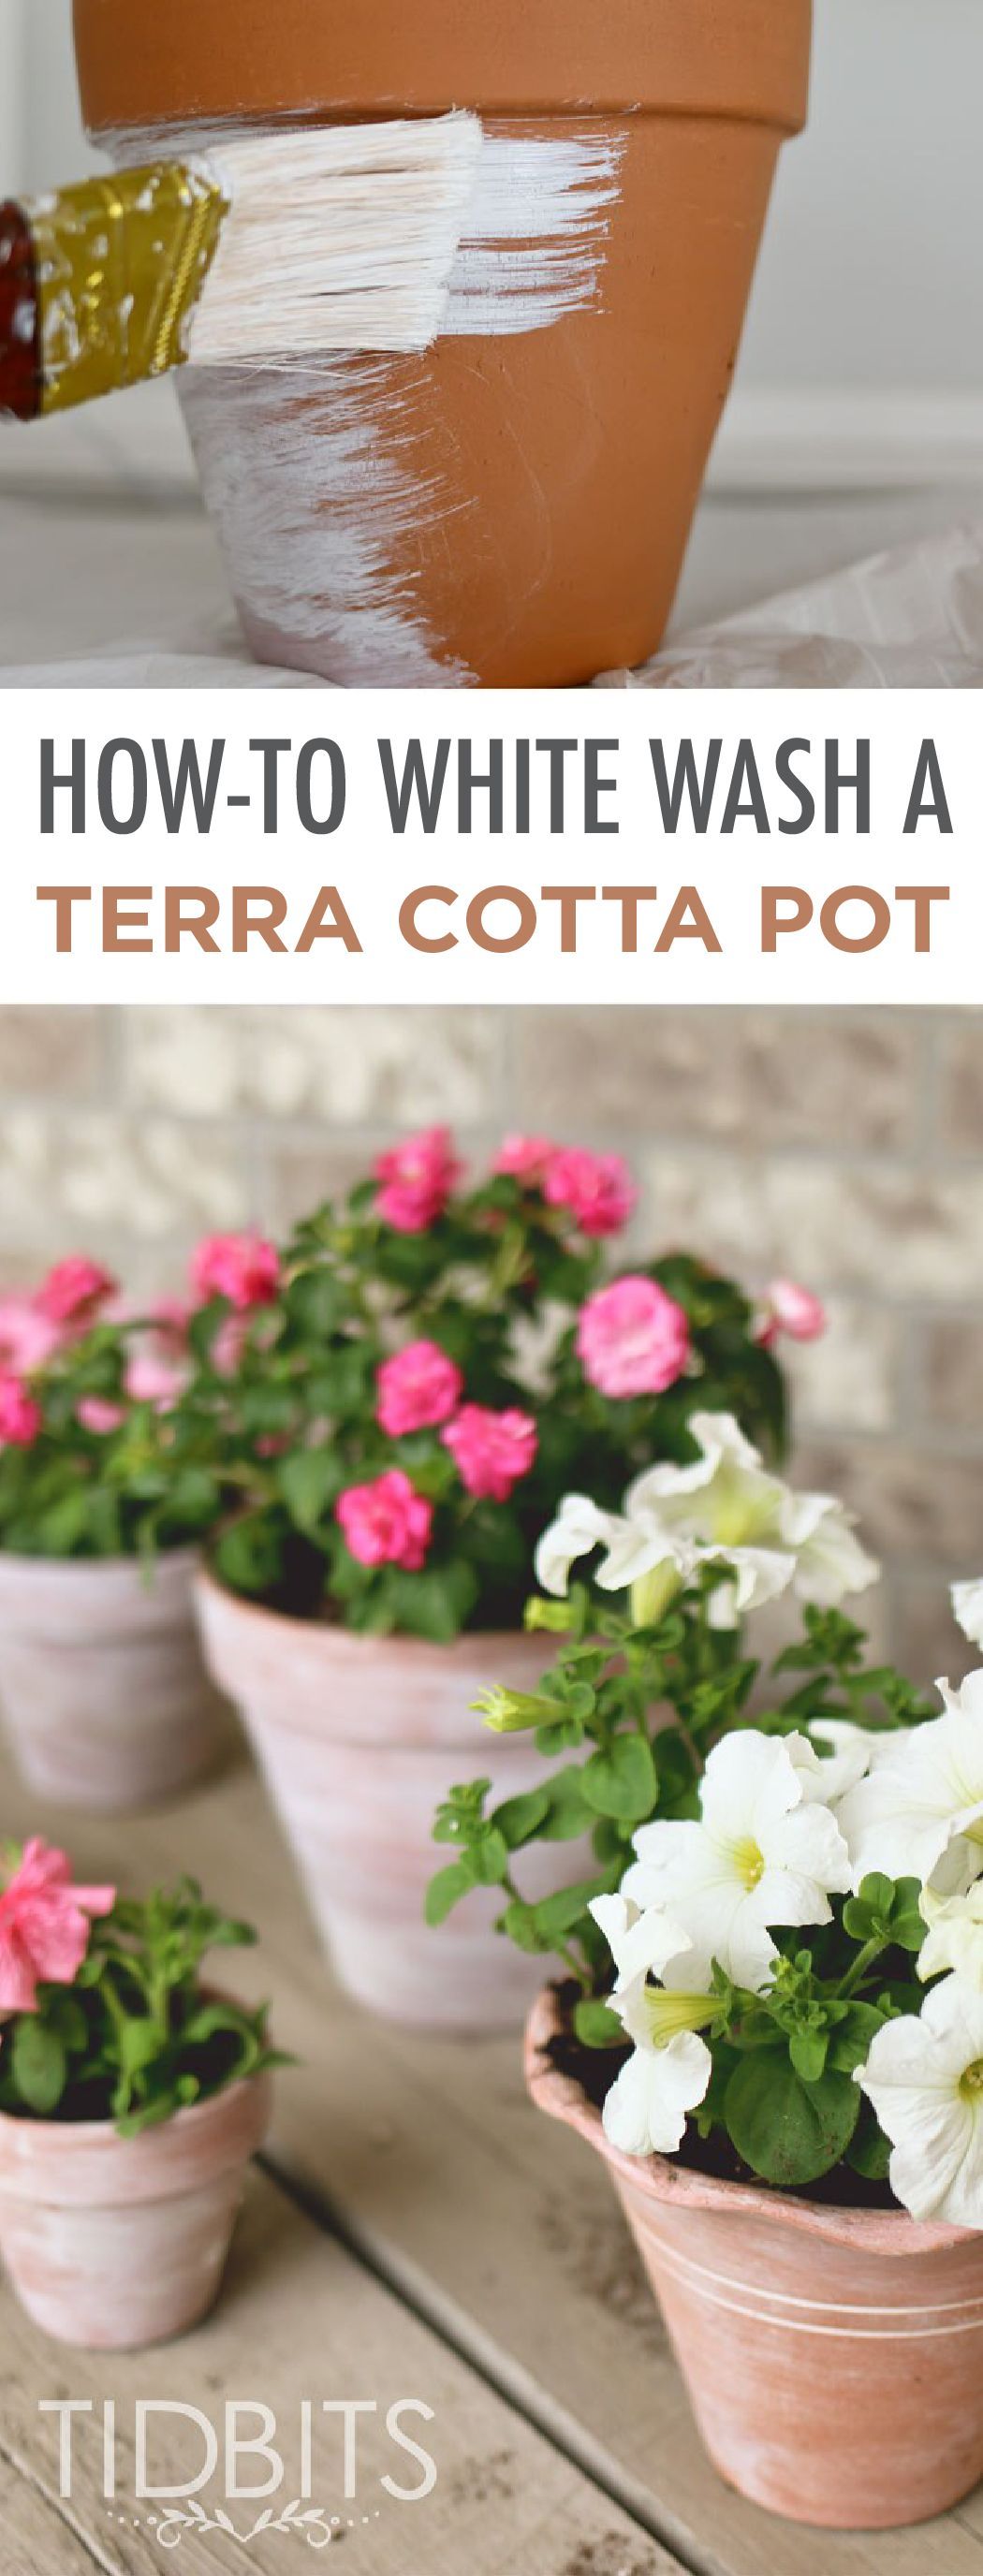 Blogger Tidbits shows you how-to whitewash terracotta pots for a simple and easy, yet effective, front porch makeover. The best